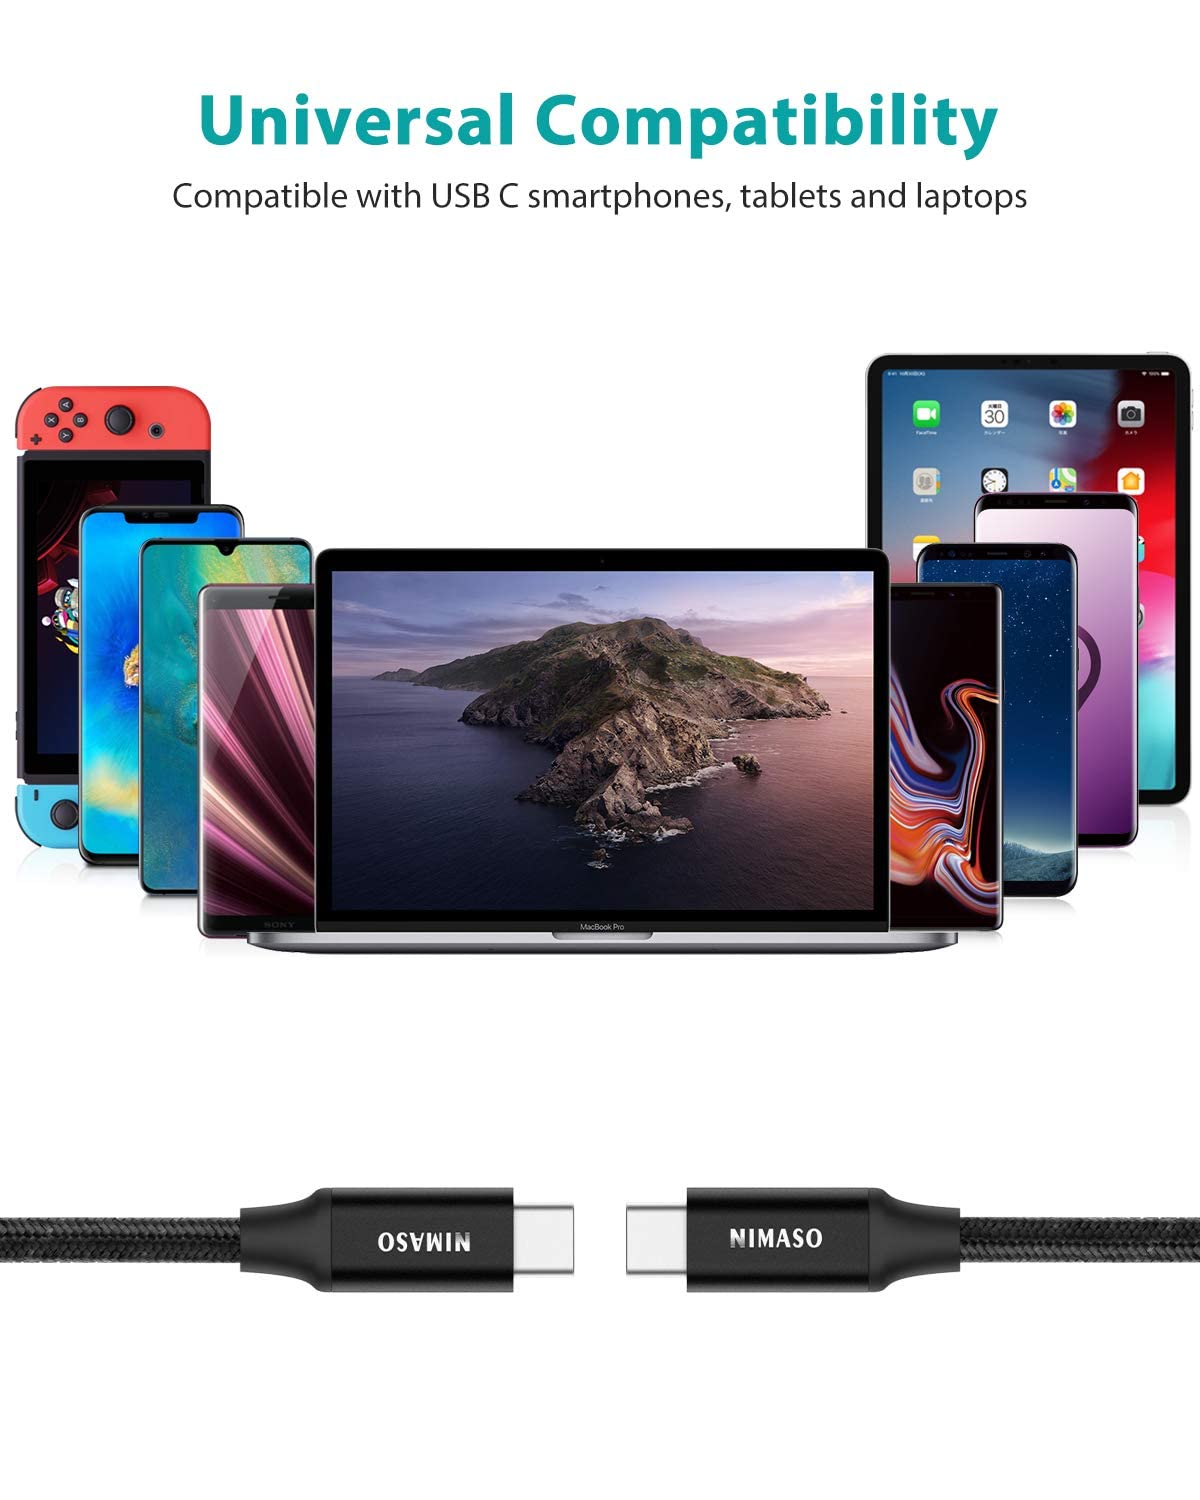 NIMASO USB C to USB C 3.1 Gen 2 Cable 10Gbps Data Transfer, 4K Video Output Monitor Cable 100W PD Fast Charging Compatible with Thunderbolt 3, MacBook Pro, iPad Pro, Galaxy S21, Google Pixel - 3.3FT